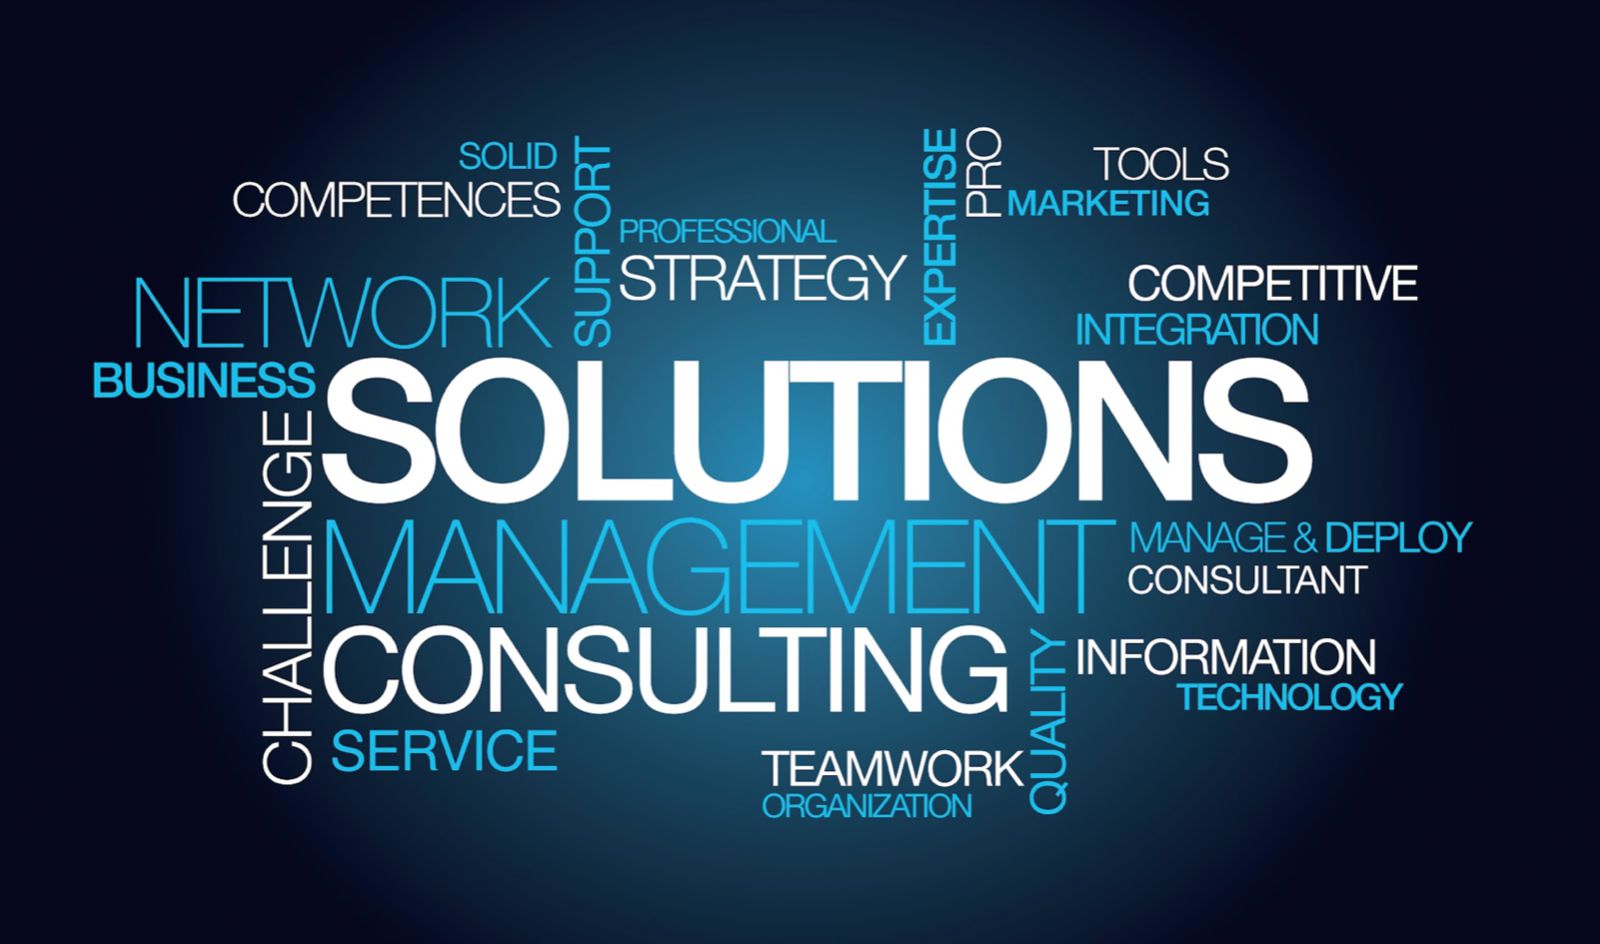 Management consulting. Words "solution management".